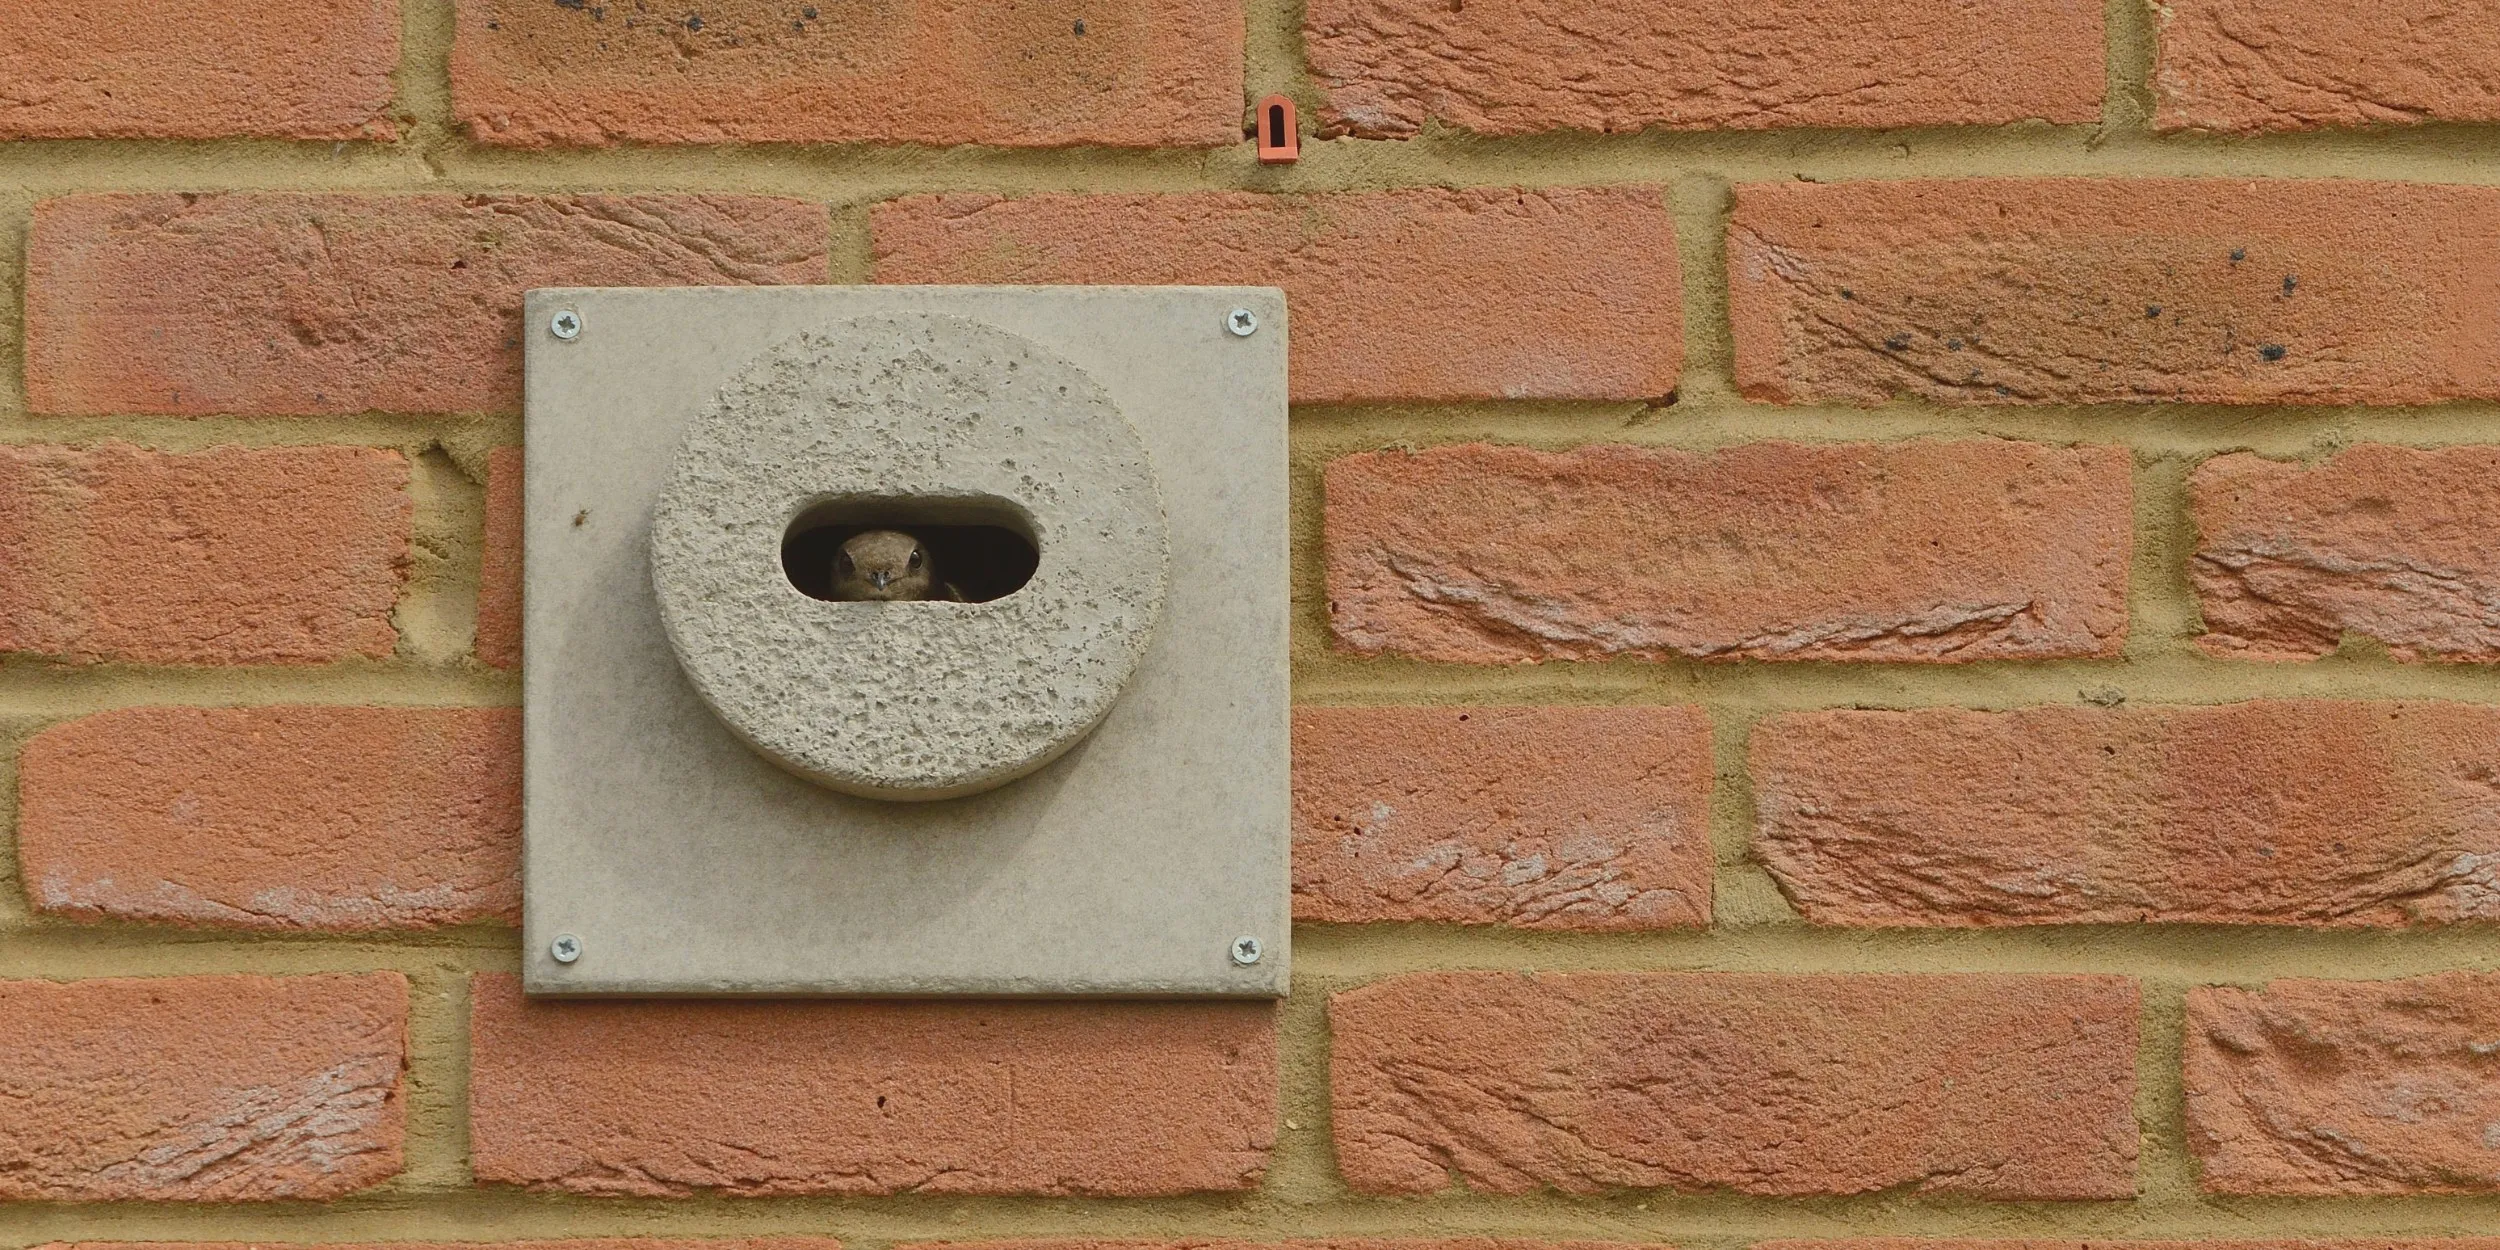 A Swift peeking out from a specially created Swift nesting brick.